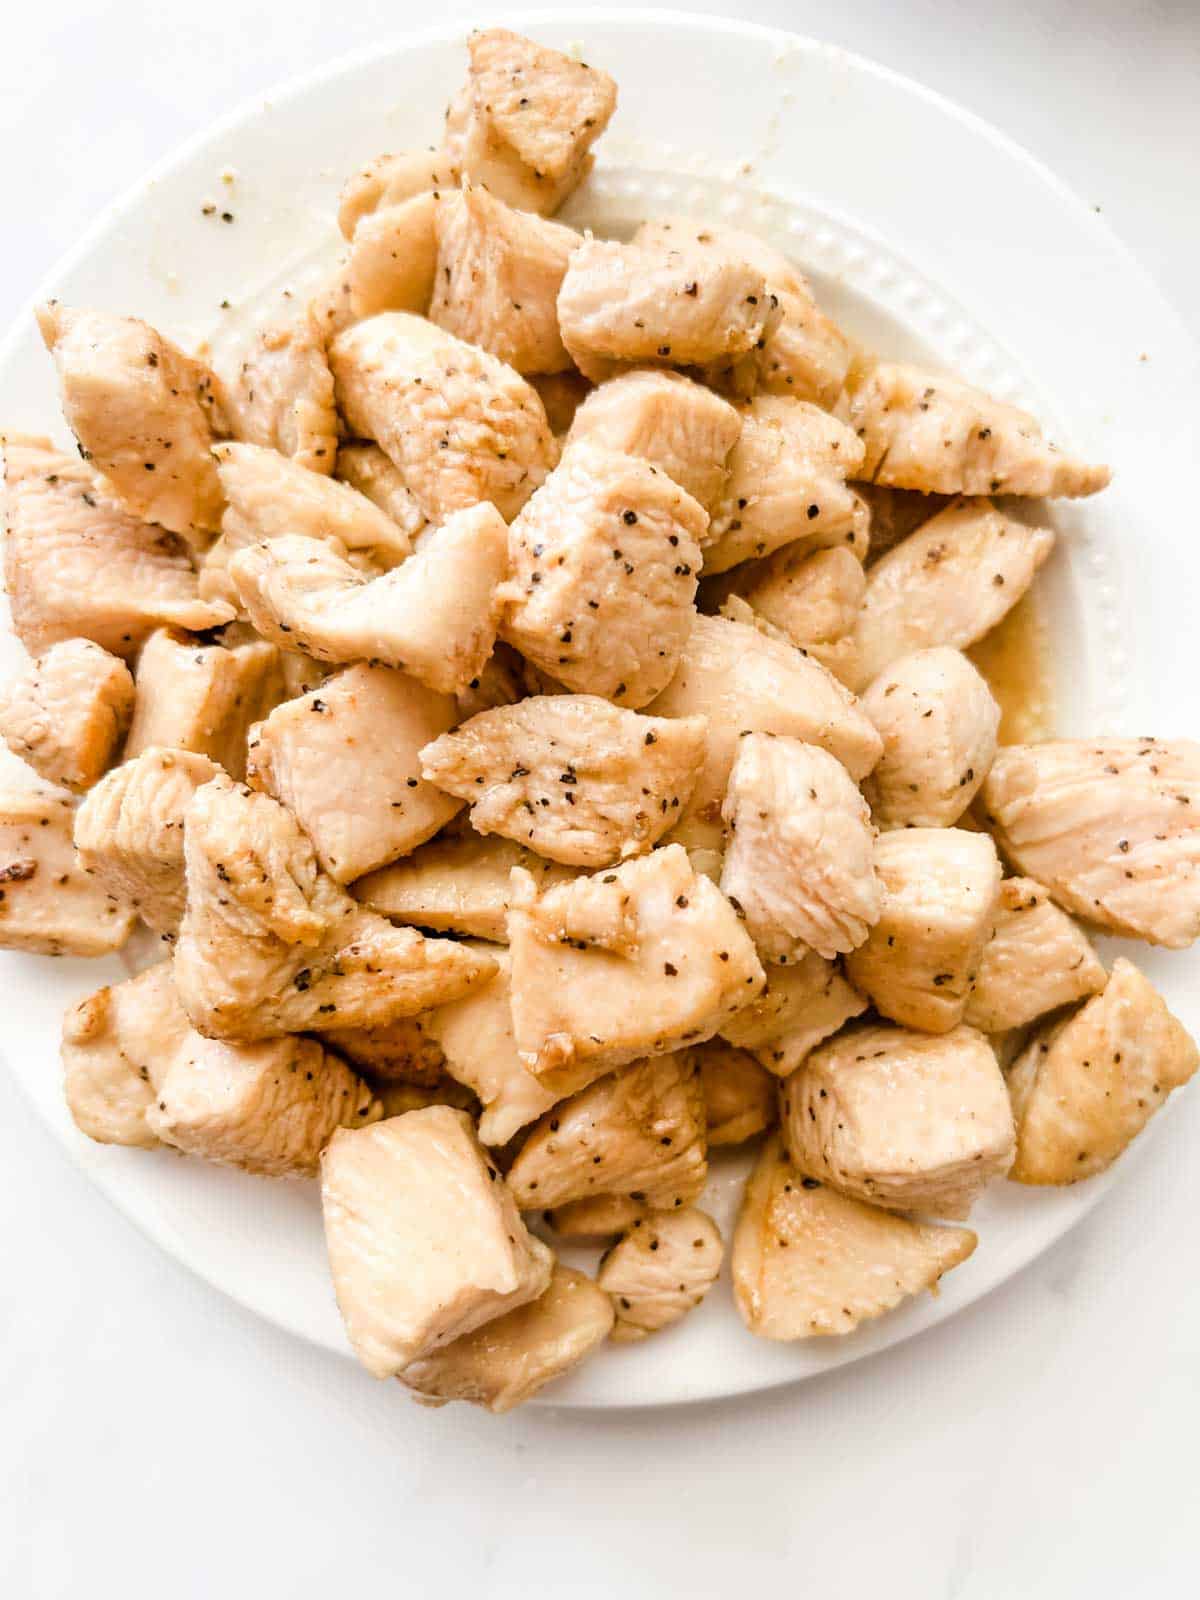 Photo of cubed cooked chicken.